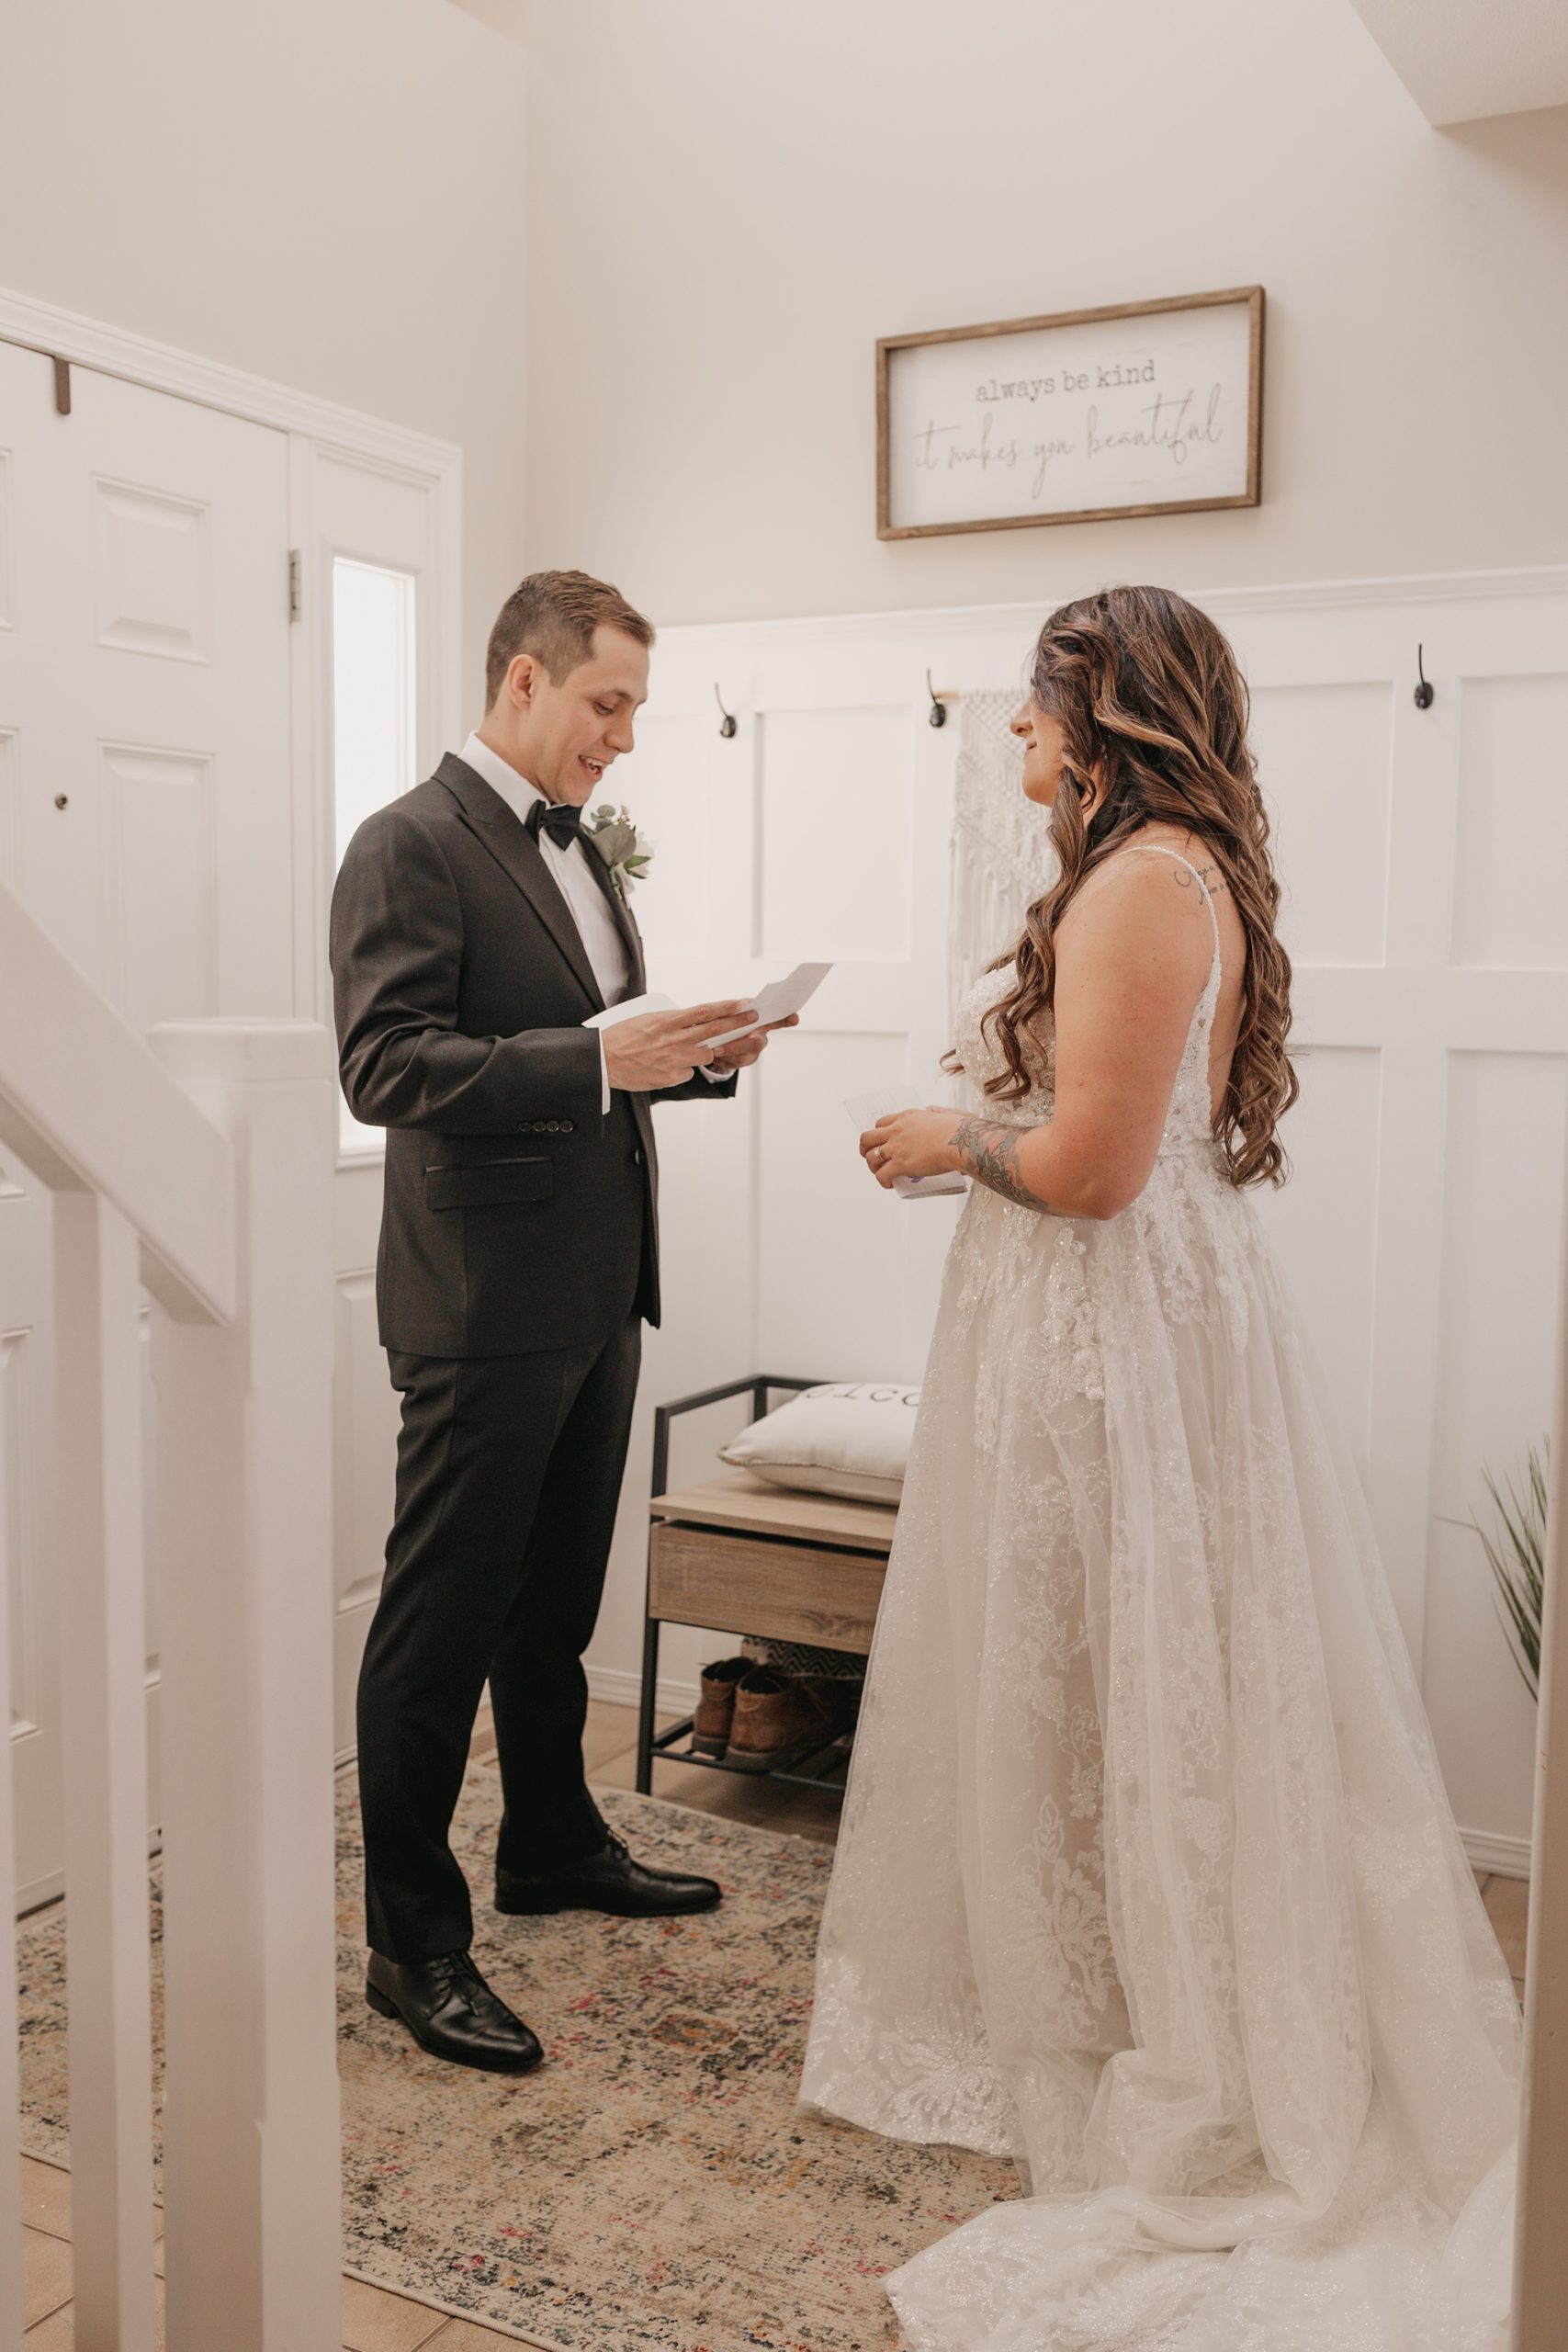 Benefits of a first look at your wedding